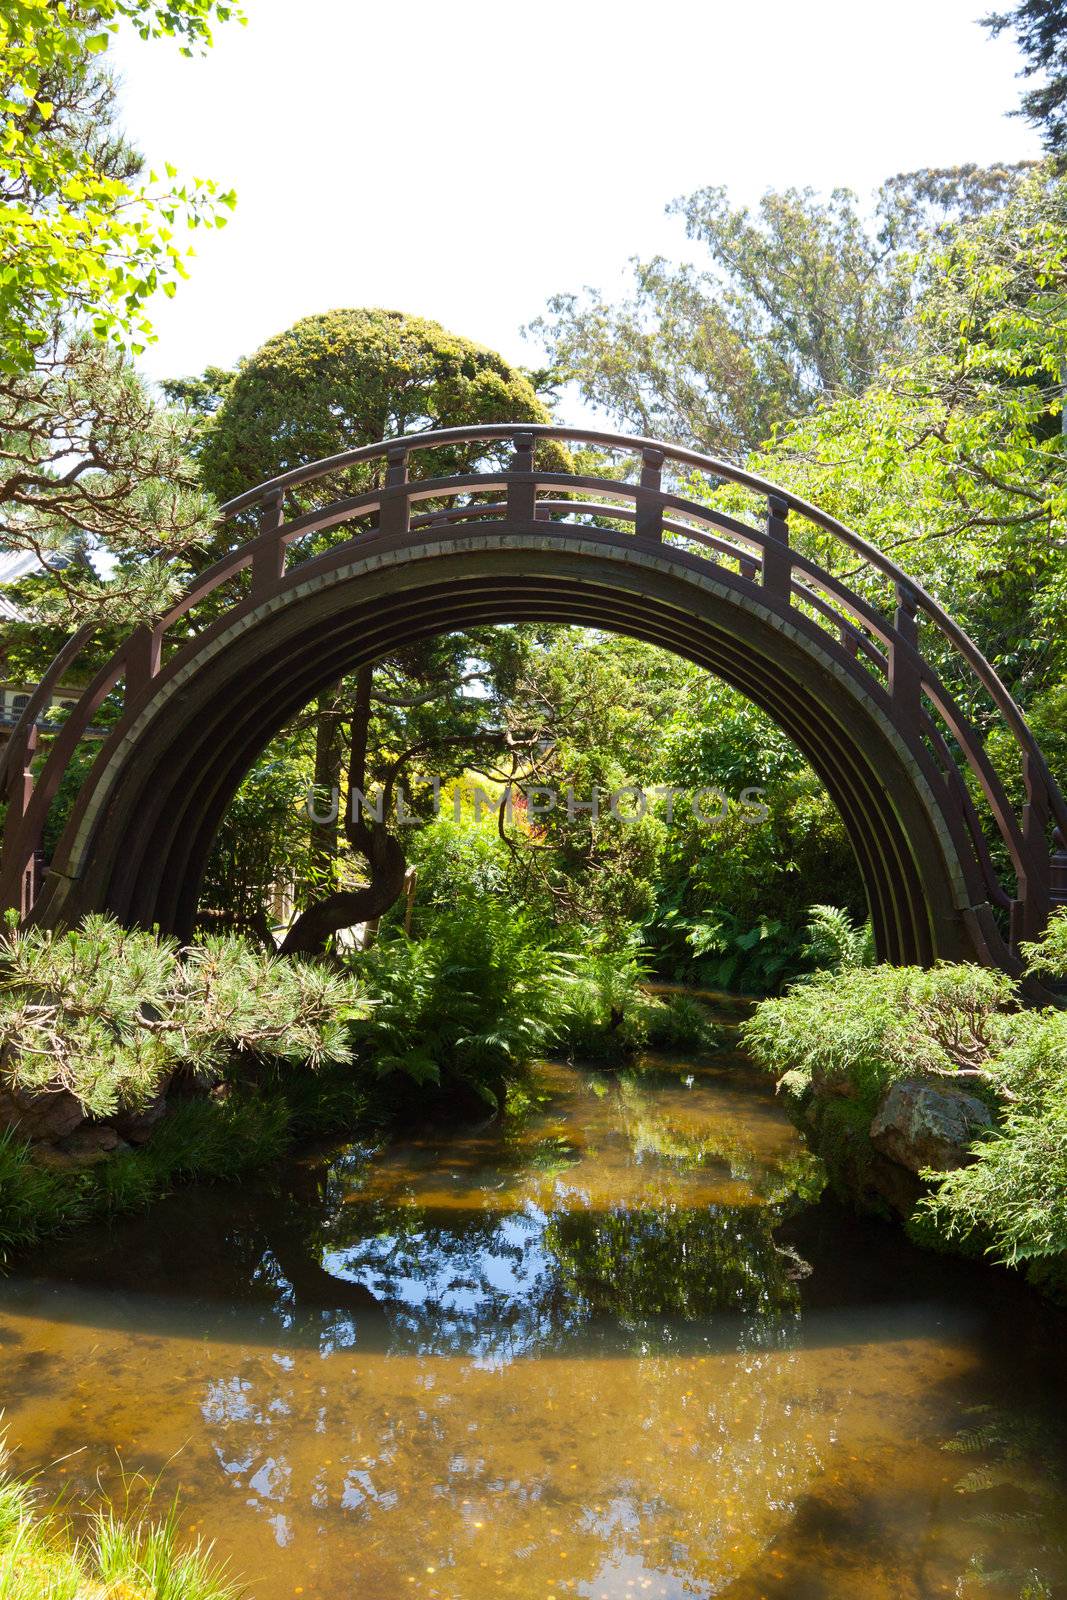 A Japanese tea garden is lush and peaceful in San Francisco.